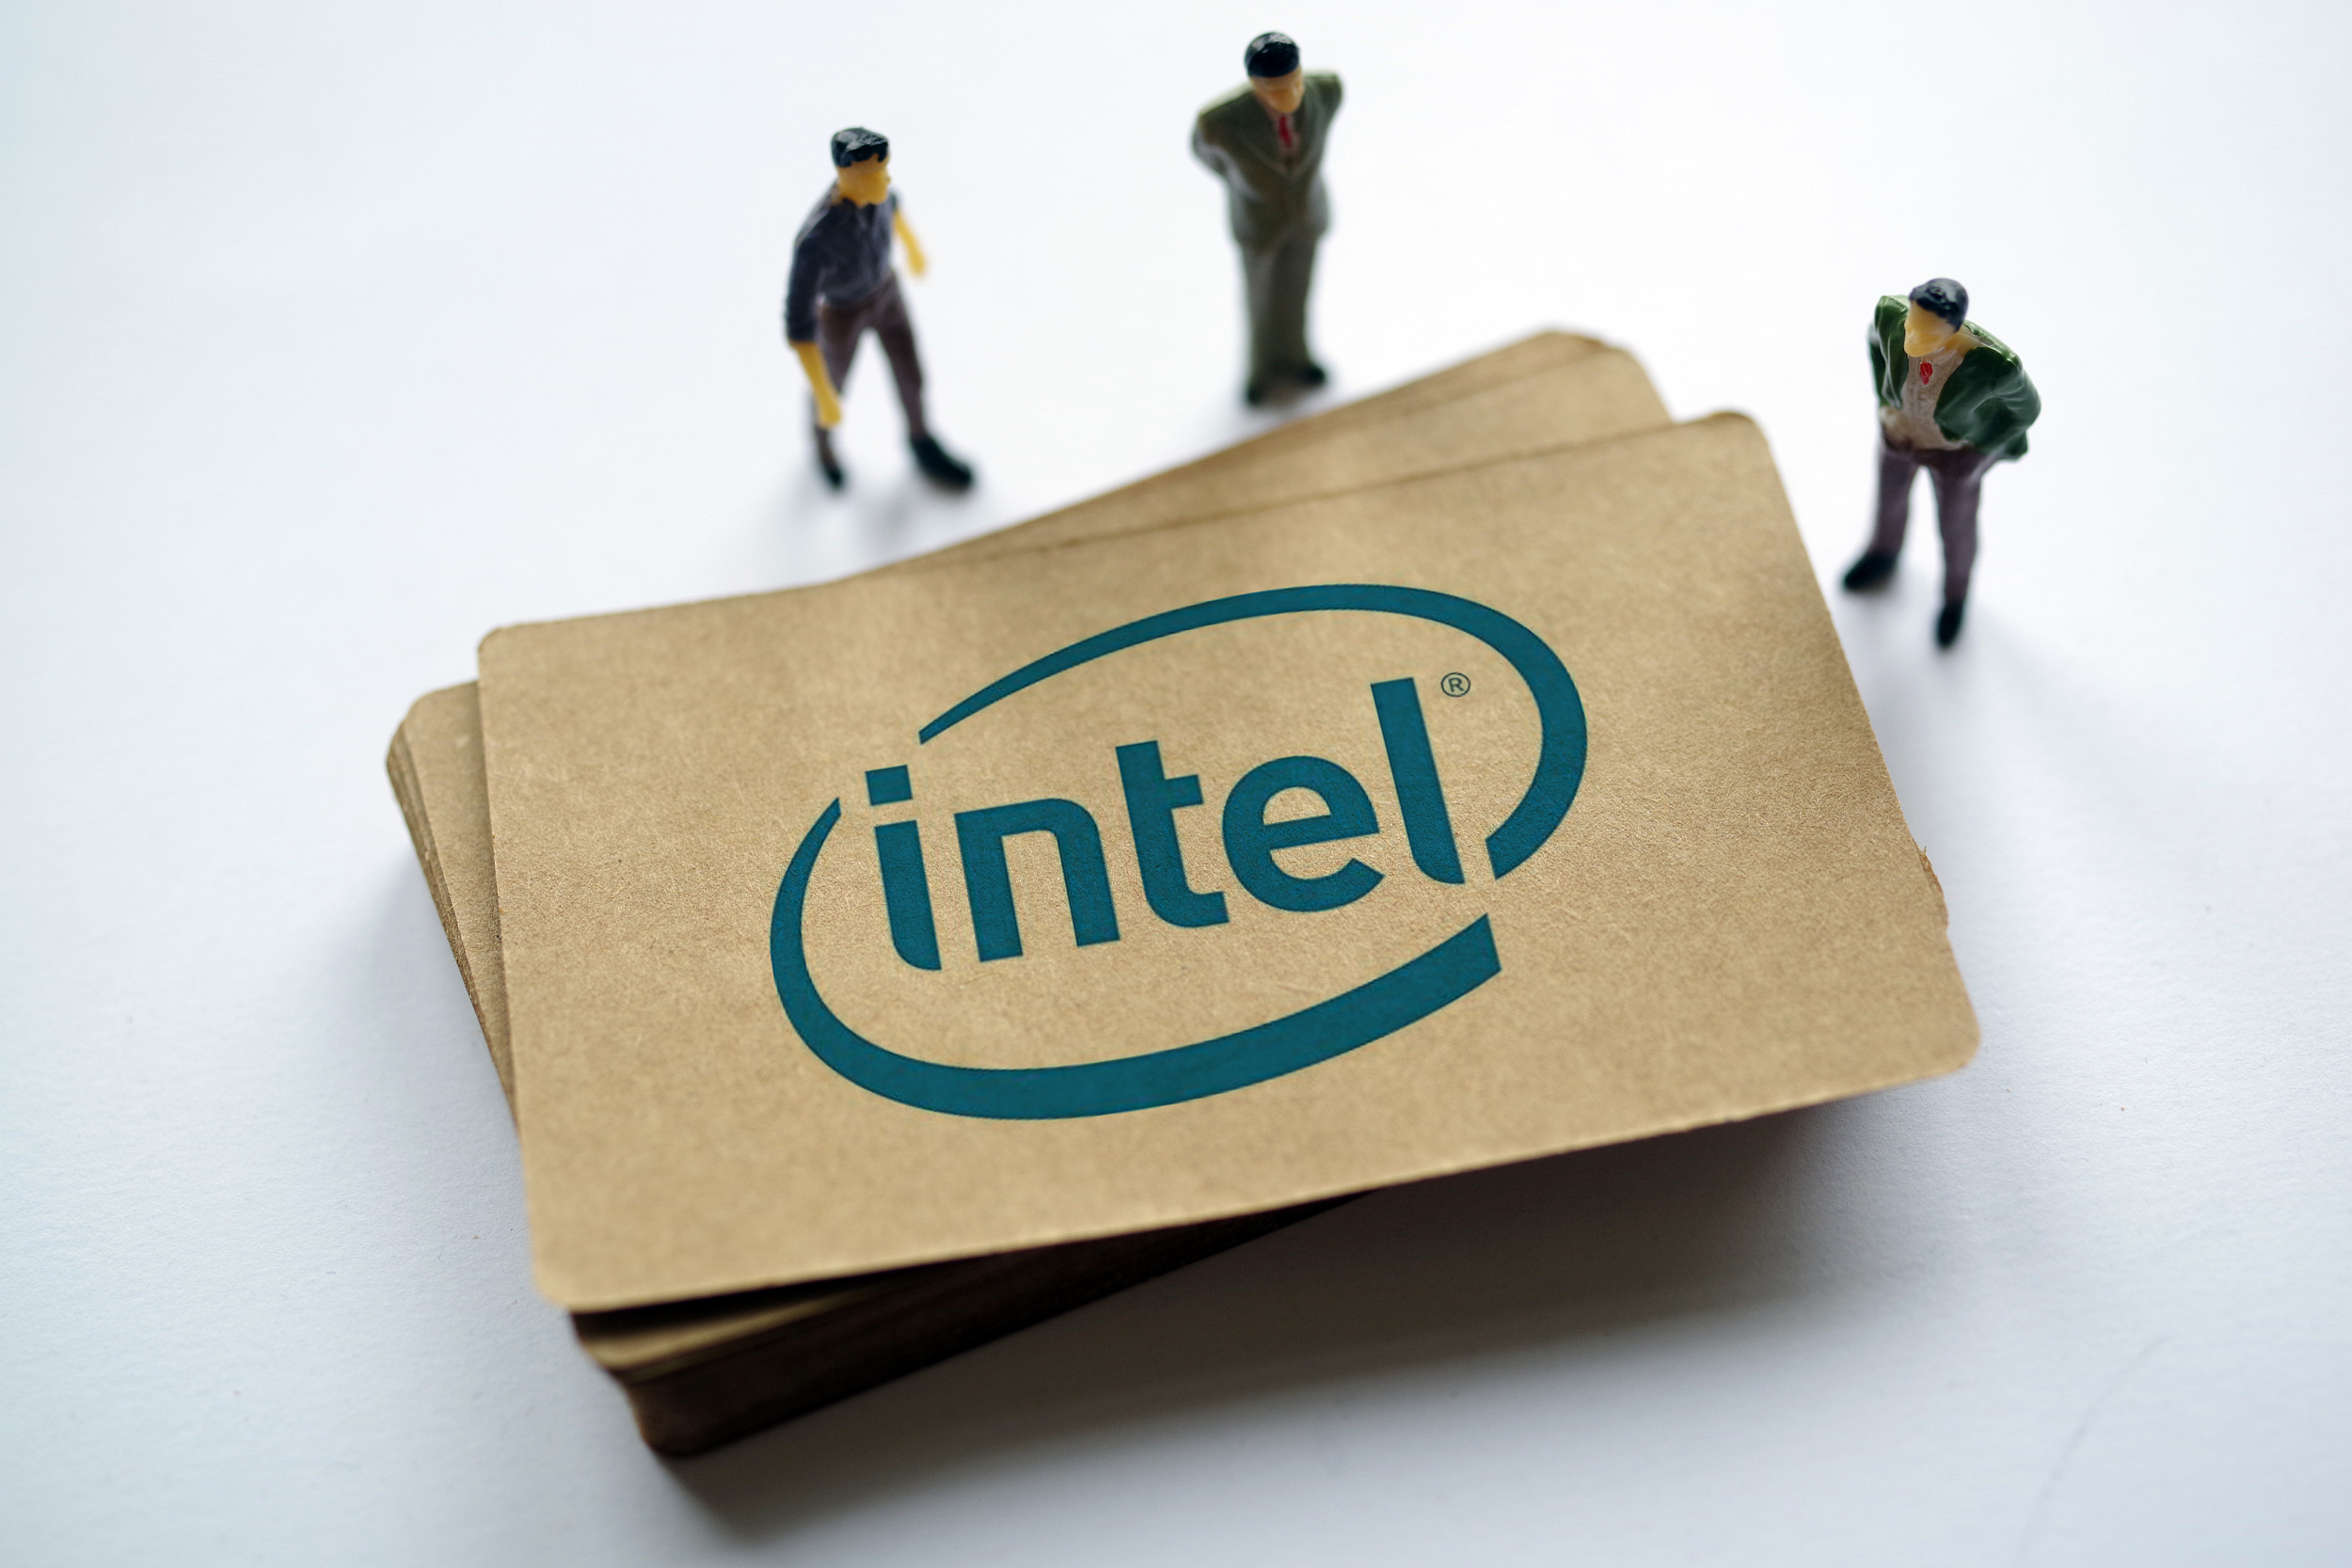 Intel dumps its home: memory chips sold to Hynix for $9 billion